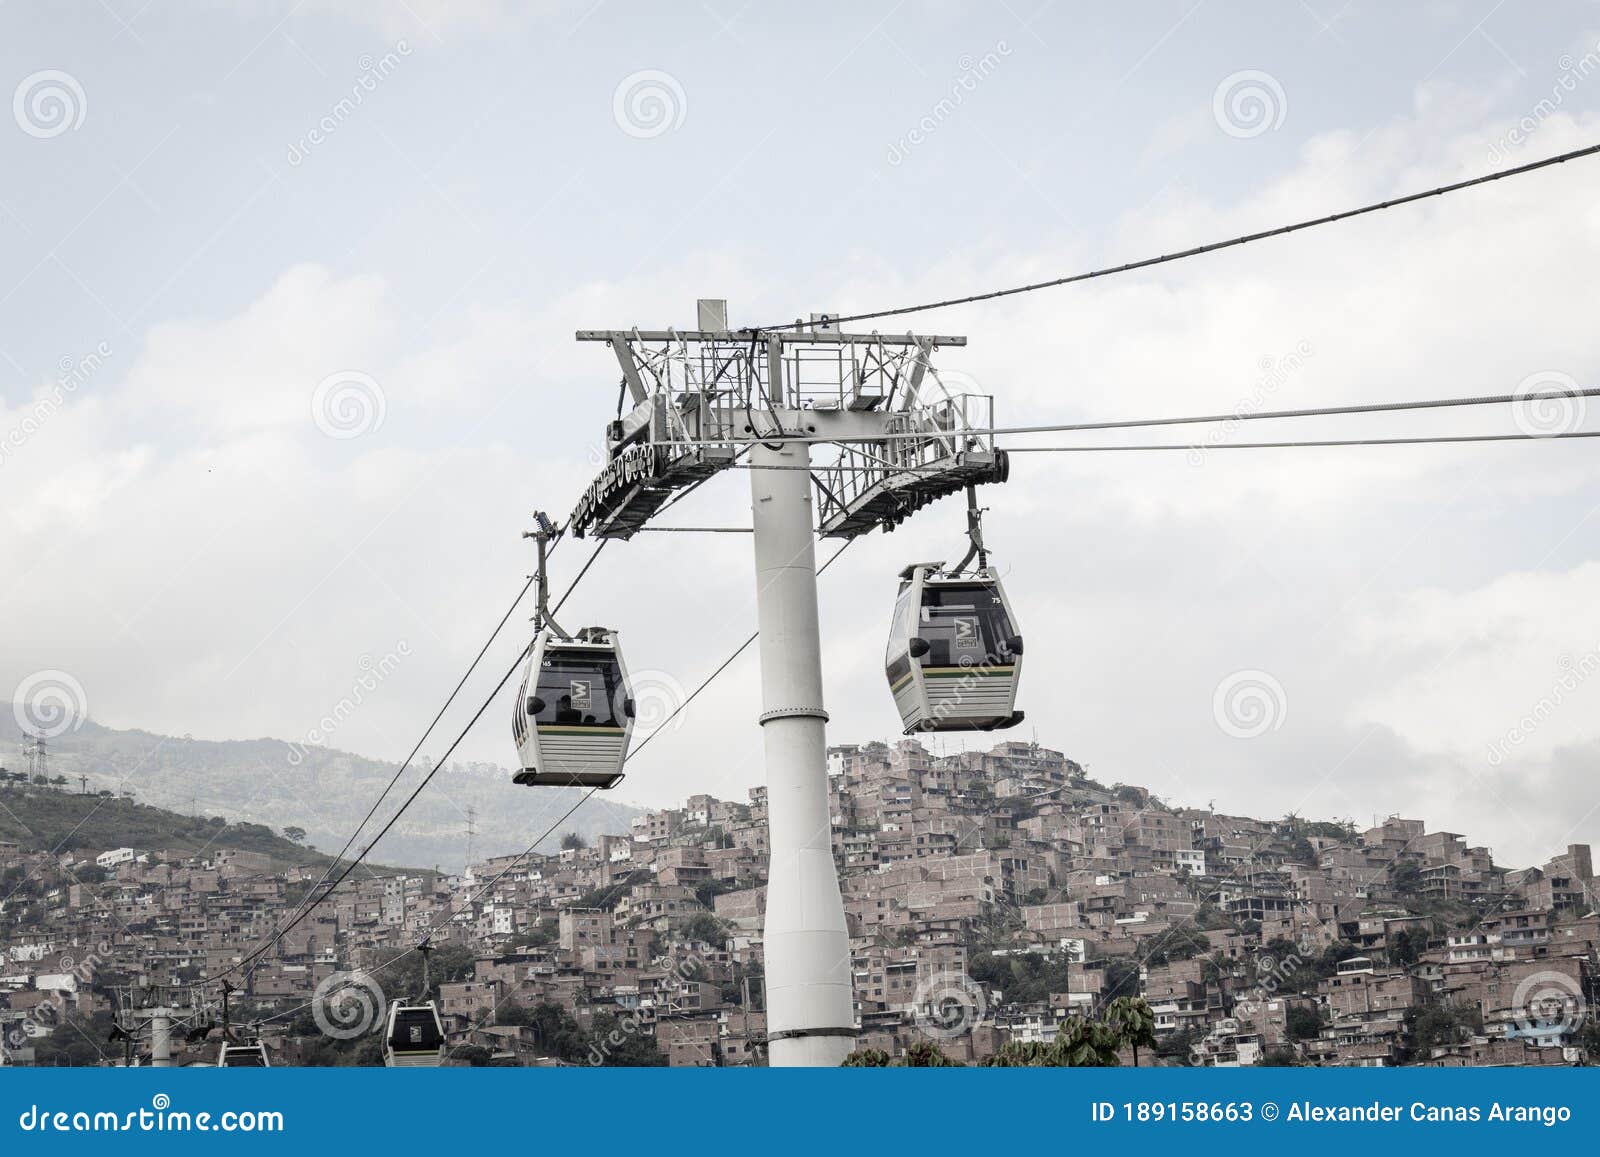 metrocable line j of the medellin metro or metrocable nuevo occidente, is a cable car line used as a medium-capacity mass transpor